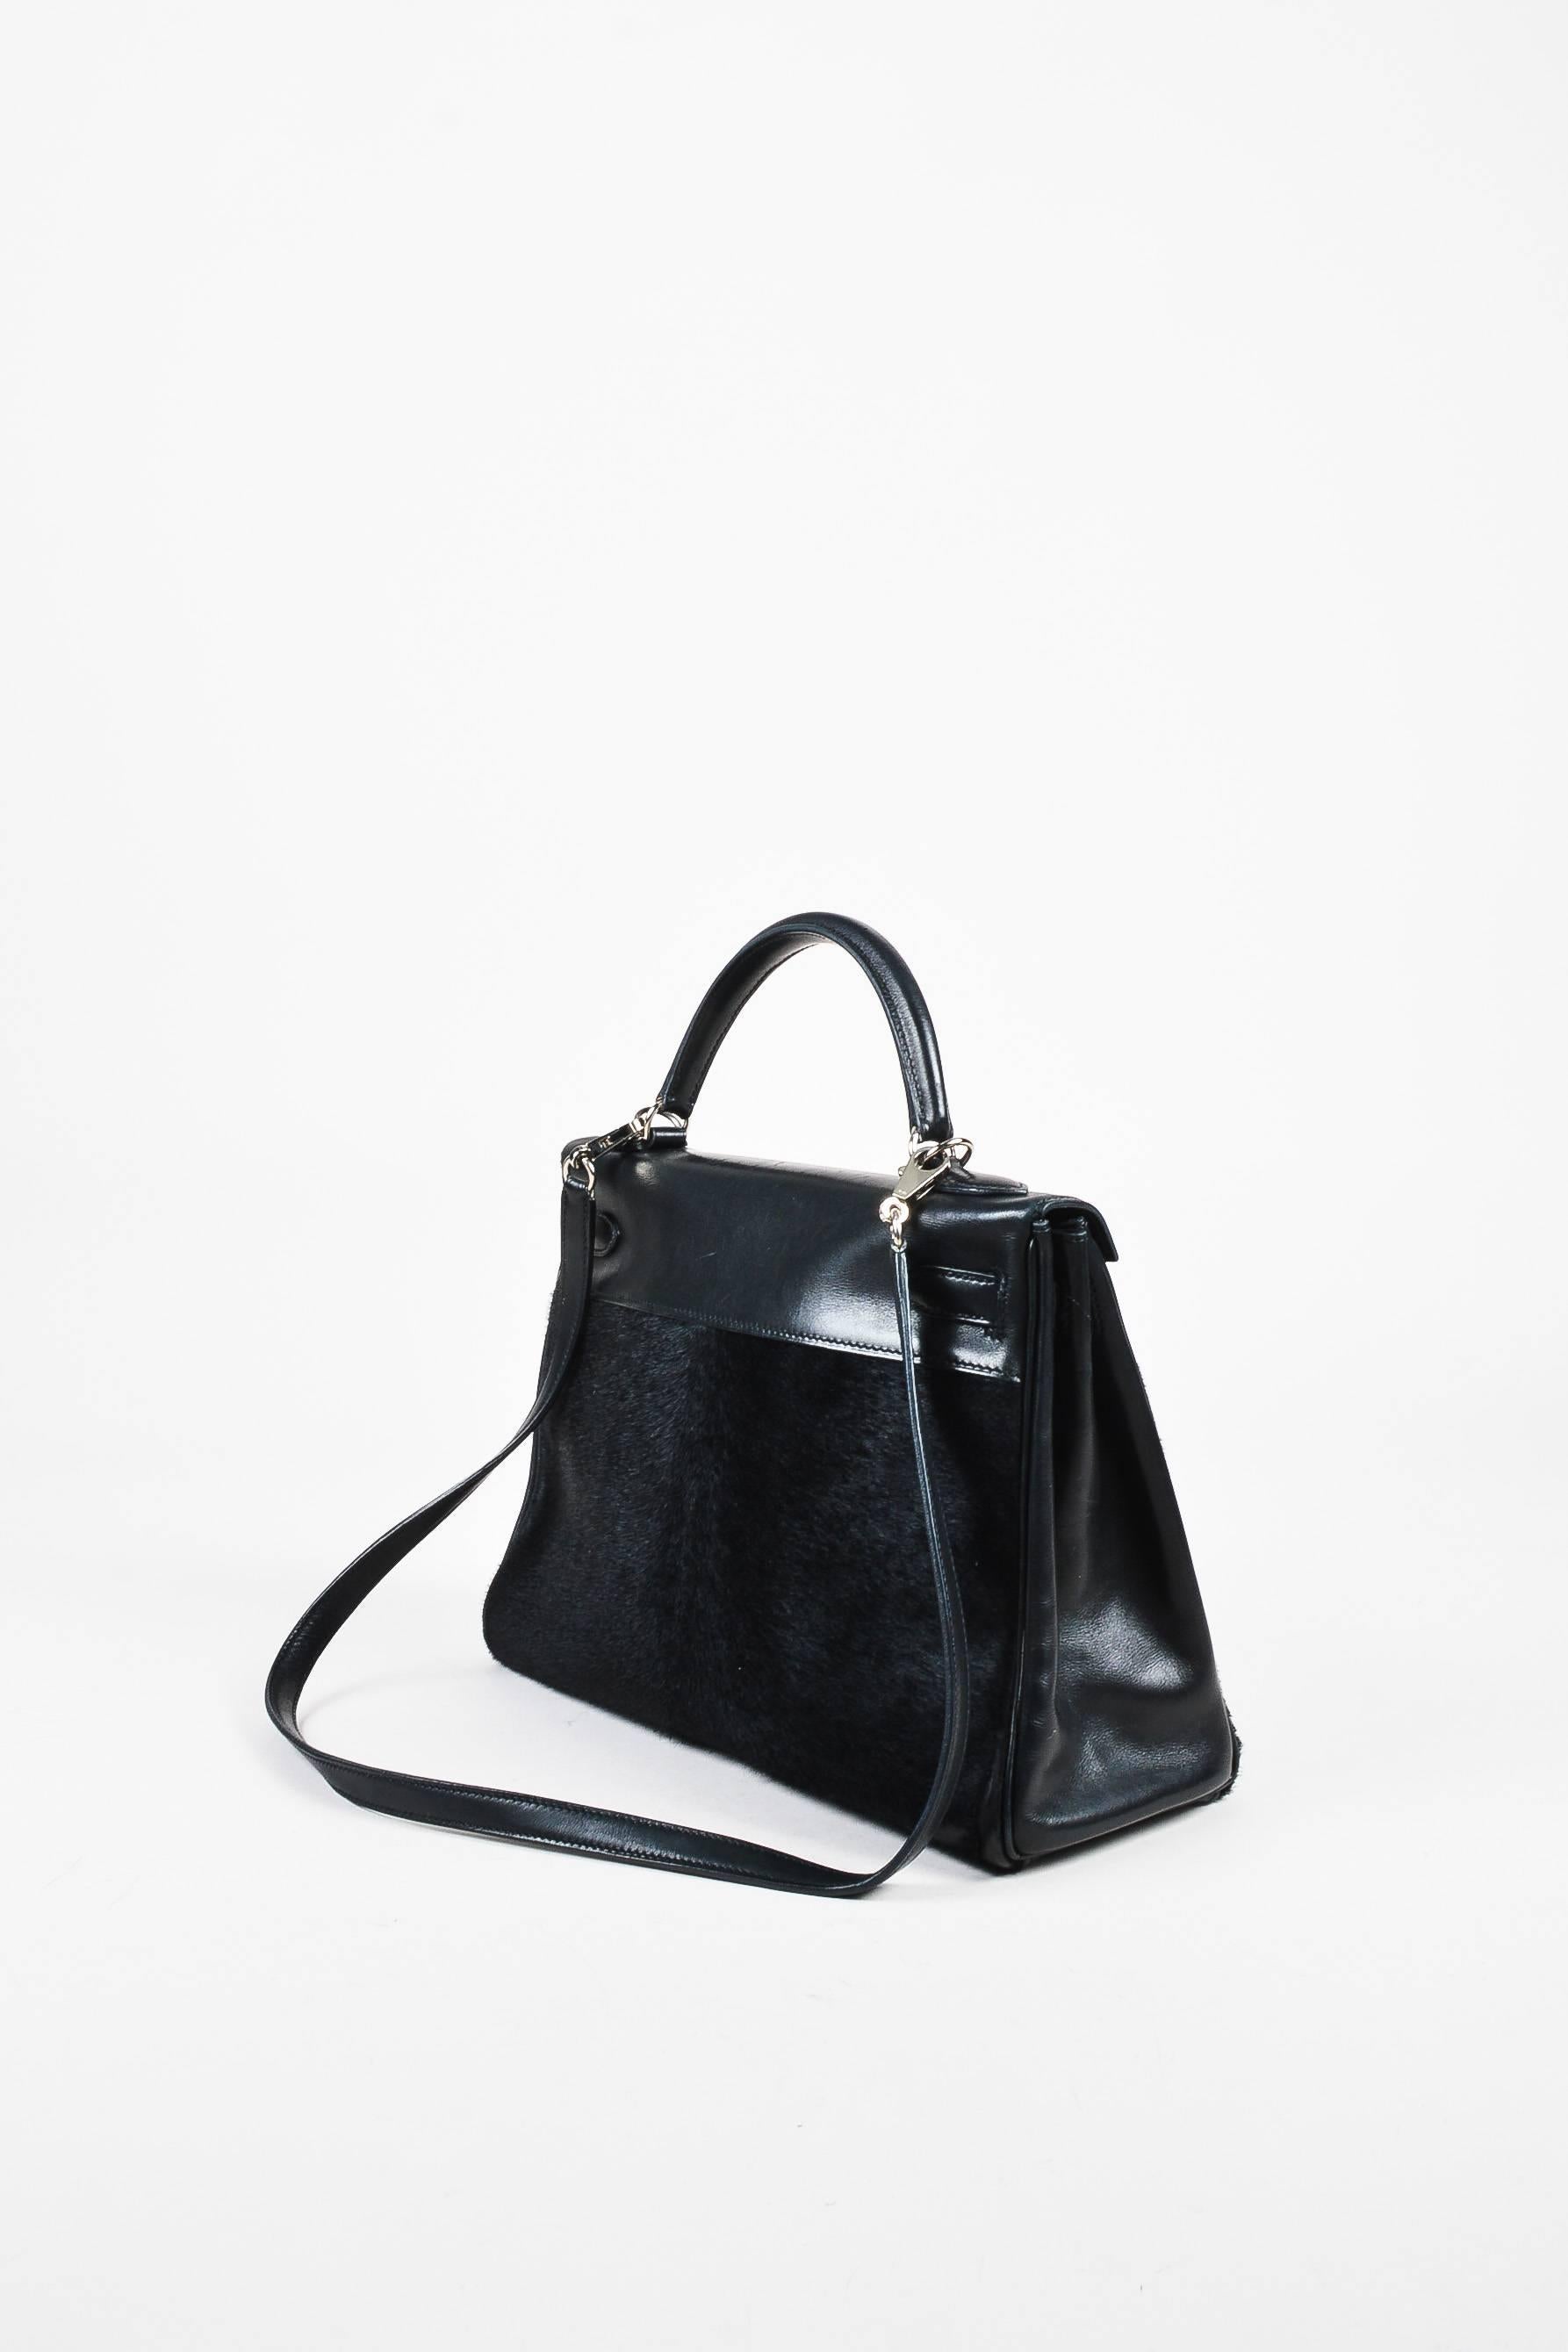 One of the single most iconic pieces in fashion's history--this classic Retourne style "Troika Kelly" bag, from French house Hermes, is a handcrafted collectible. Masterfully constructed of ponyhair, evercalf, and box calf leathers in a